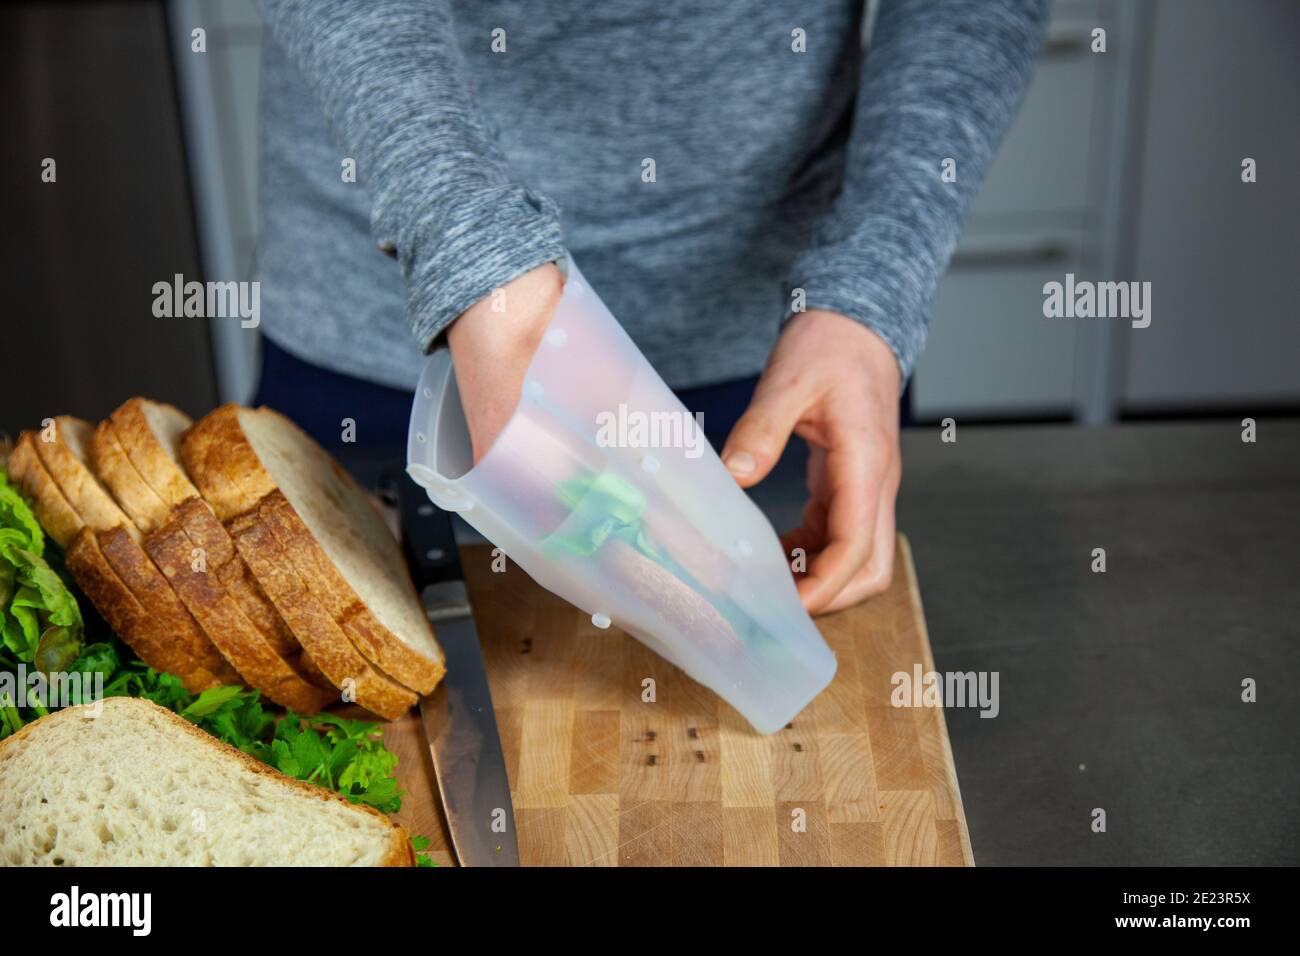 A women prepares lunch and puts a sandwich into a food-grade silicone bag as part of a zero-waste lifestyle to replace plastic bags Stock Photo